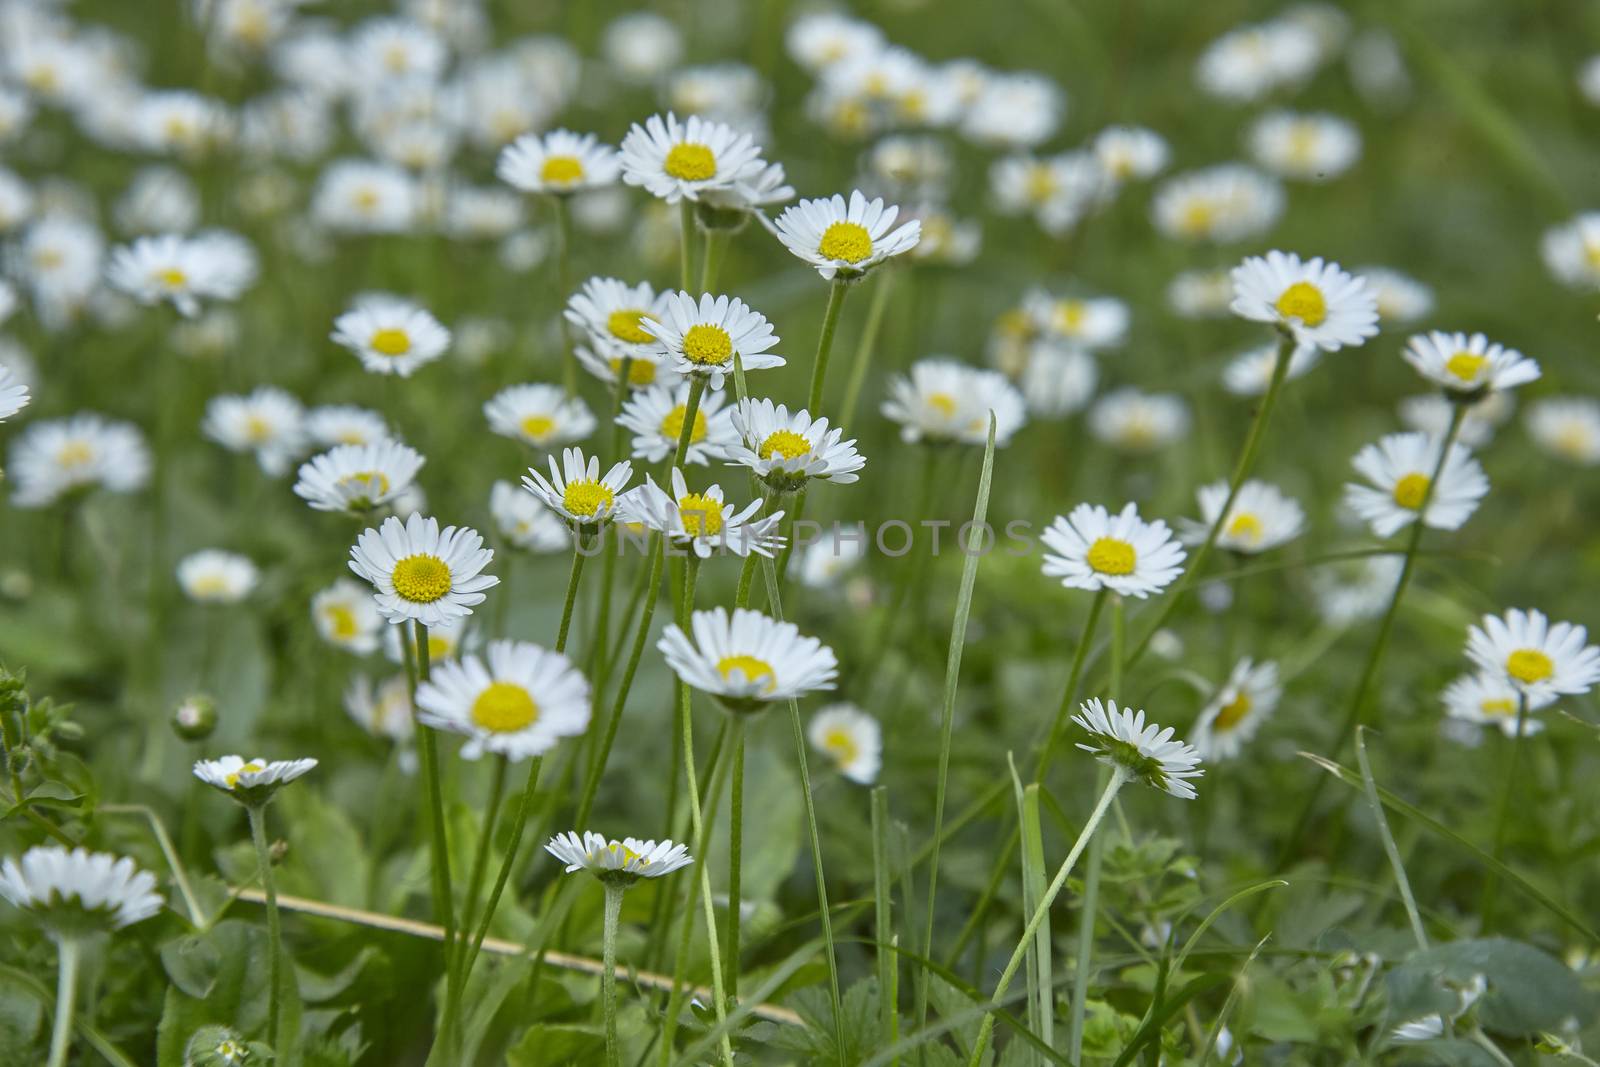 Spring blooms and with her the daisies are born: small white flowers that cover the whole garden